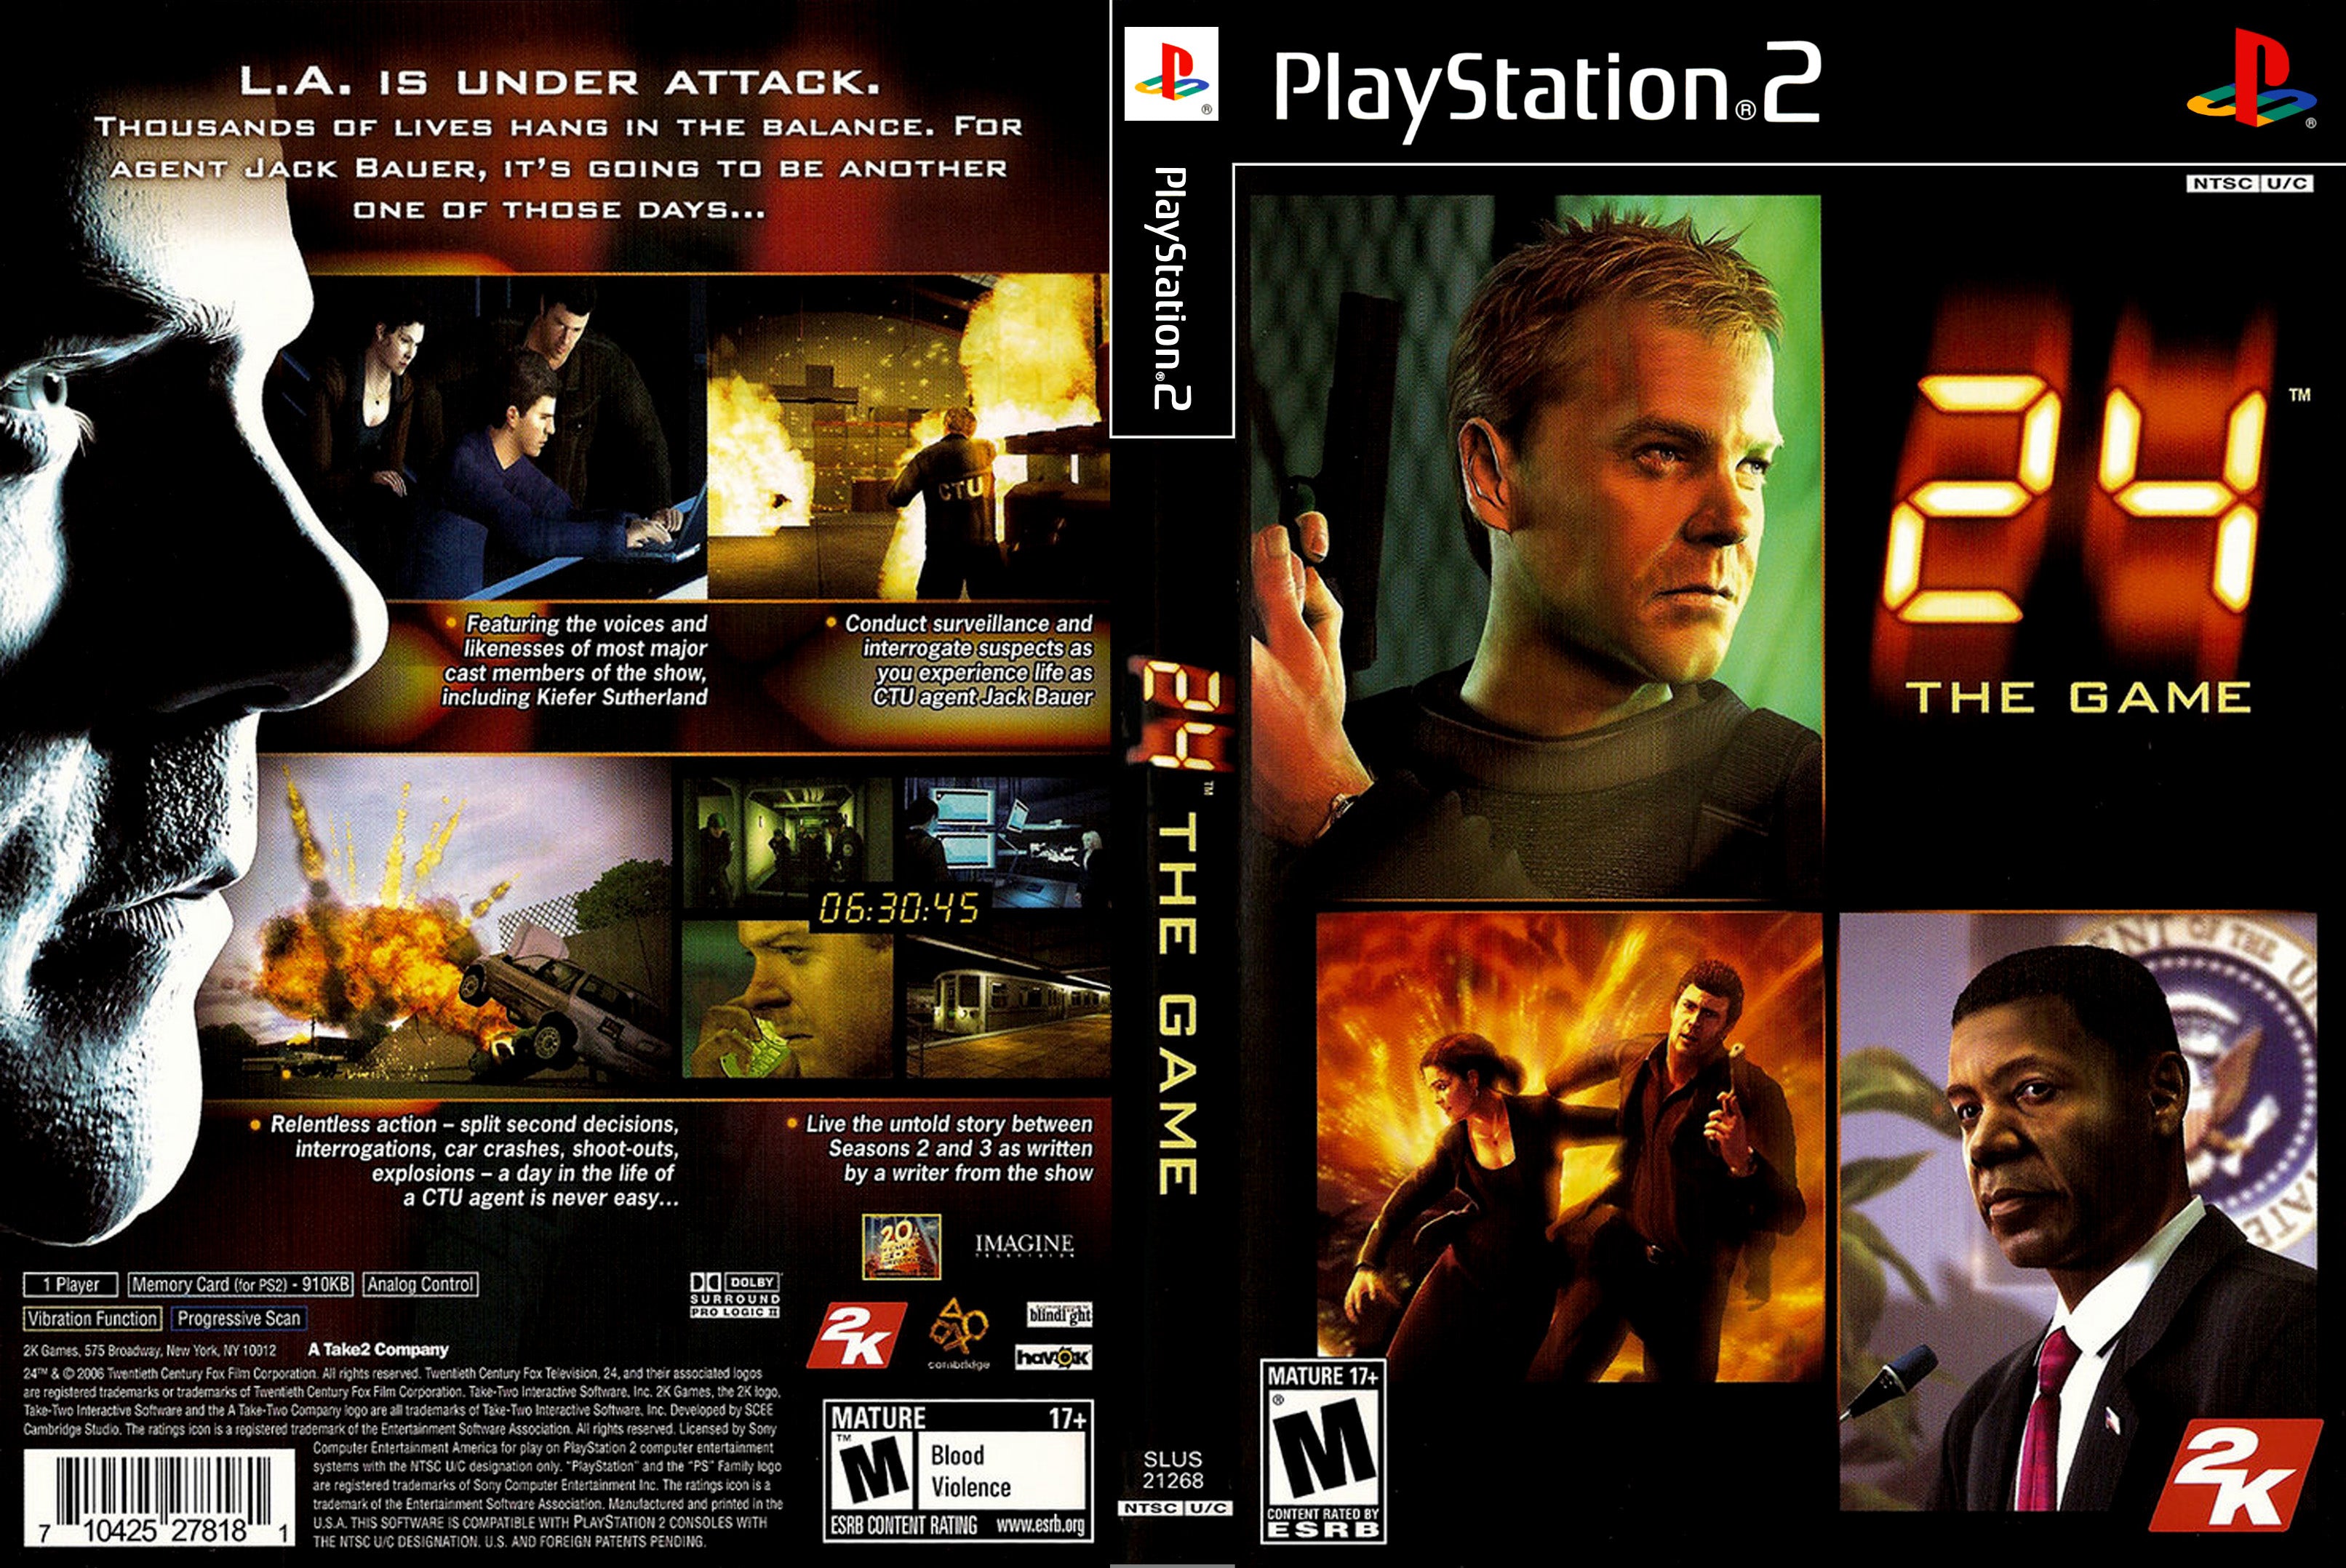 24: The Game - PlayStation 2